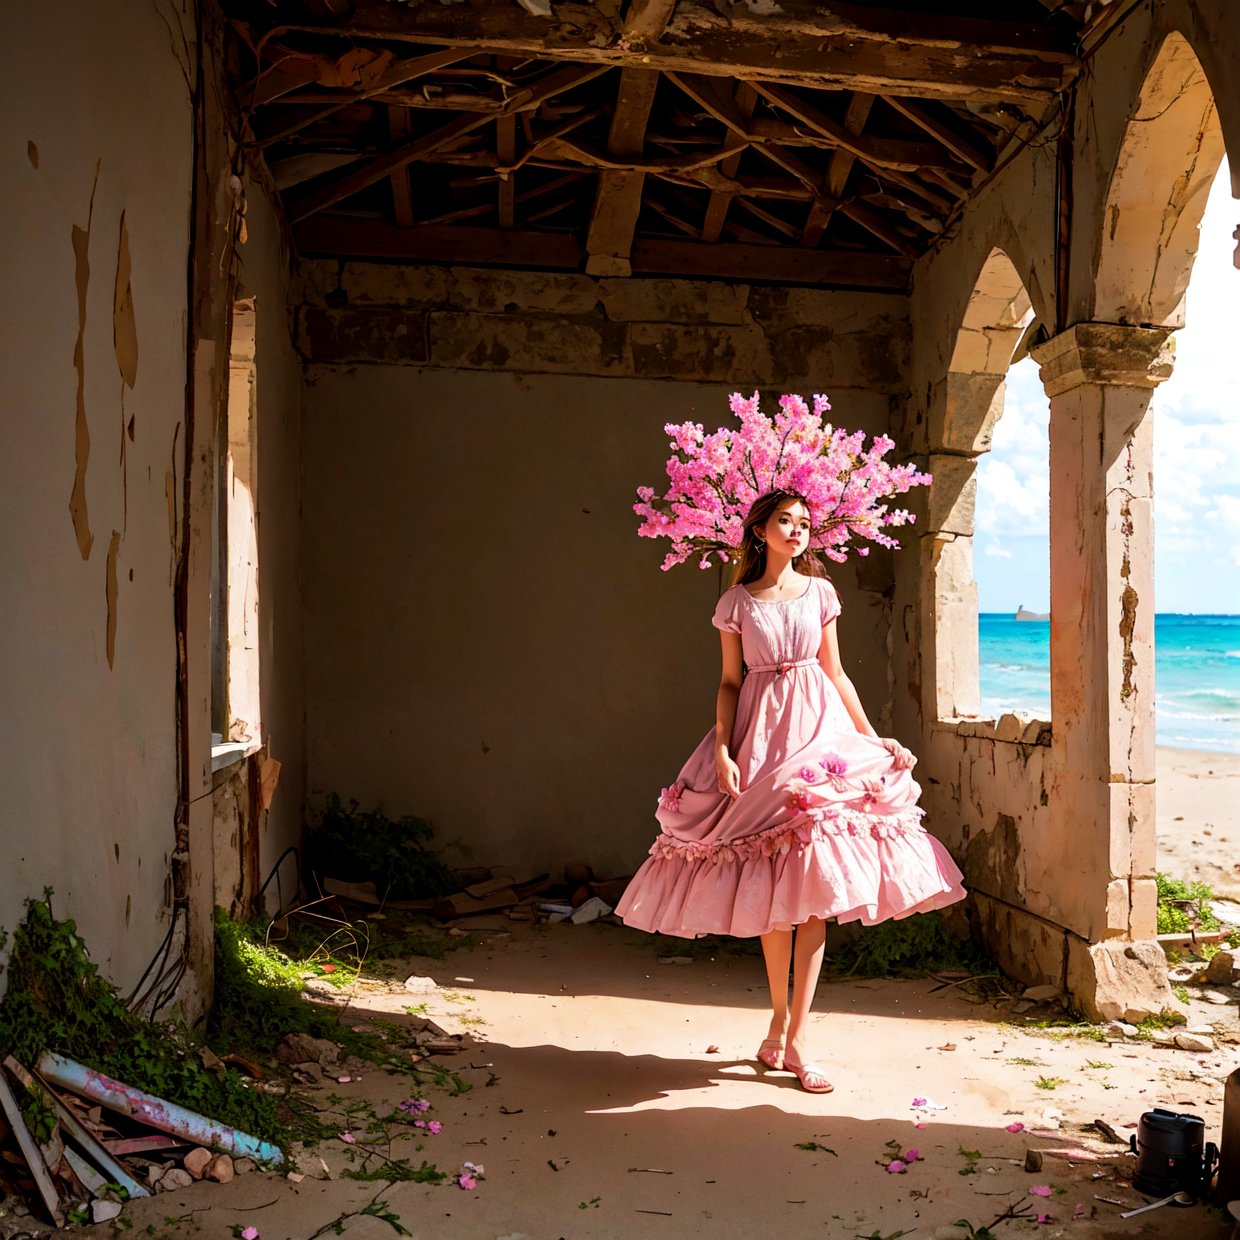 an amazing pink tree on a rock on the beach, in the style of realistic depiction of light, passage, faith-inspired art, abandoned spaces, light-filled scenes, immersive environments, flower and nature motifs --ar 14:25,girl